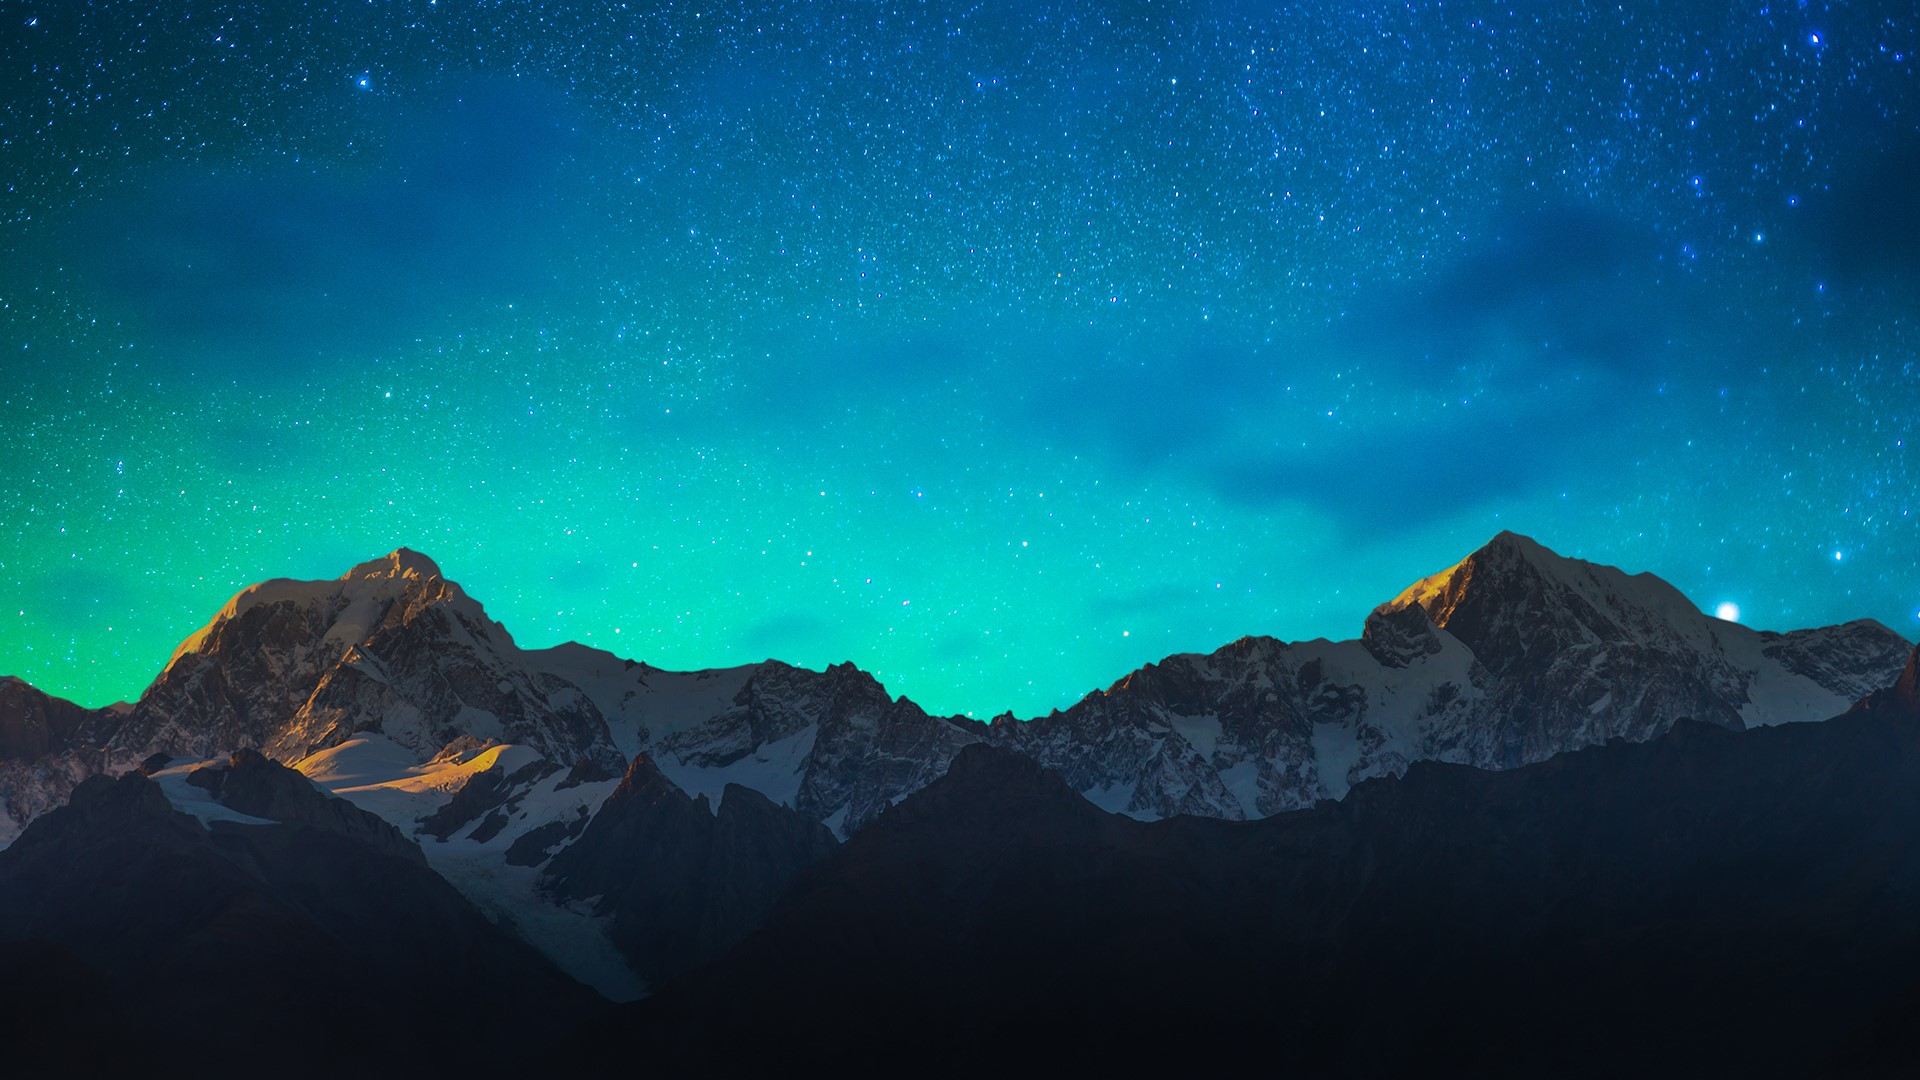 General 1920x1080 nature landscape mountains stars night sky snowy mountain clouds far view New Zealand cyan